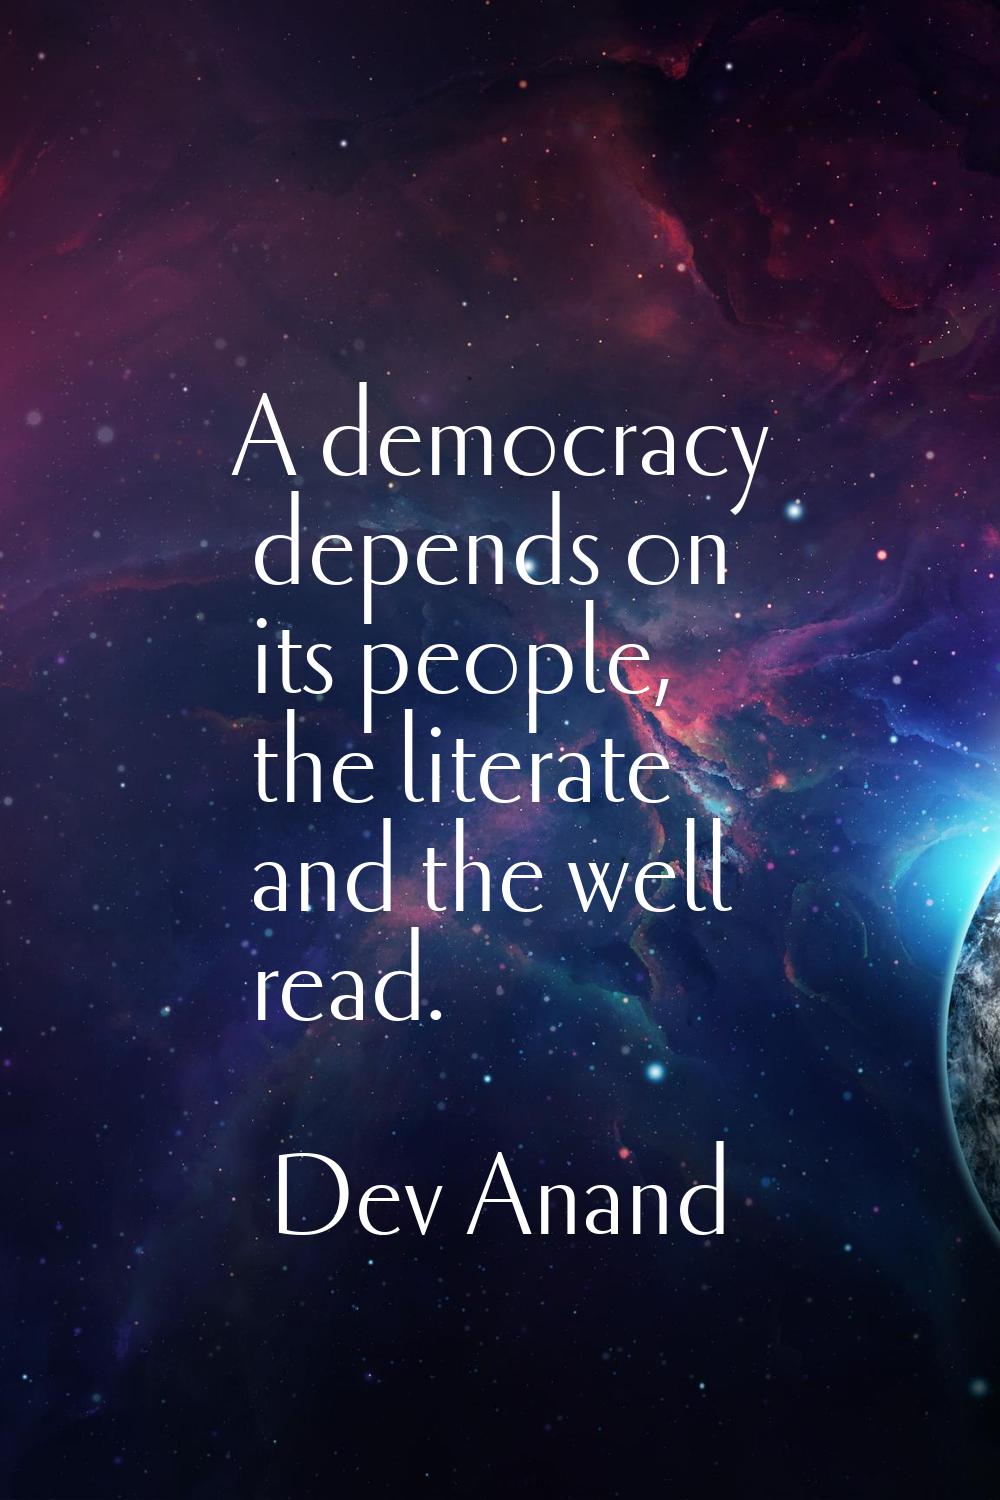 A democracy depends on its people, the literate and the well read.